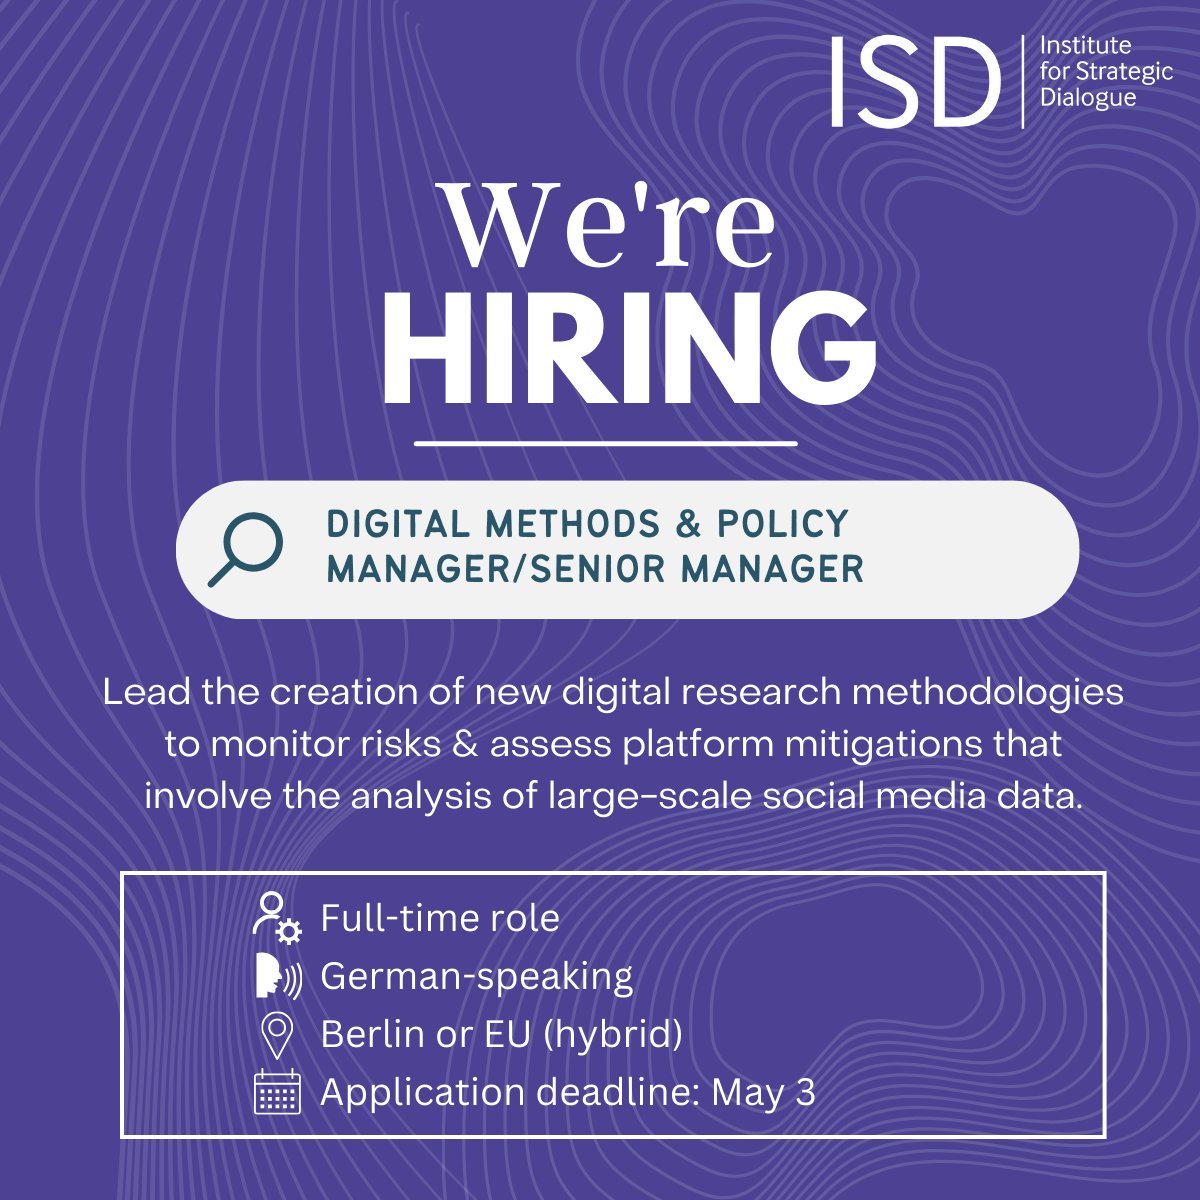 Deadline May 3! ⏰ ISD is hiring a Digital Methods & Policy Manager/Senior Manager with expertise in digital methods & digital policy (focus on DSA), knowledge of ISD issue sets & experience in program management. Find out more about this opening 👇isdglobal.recruitee.com/o/digital-meth…